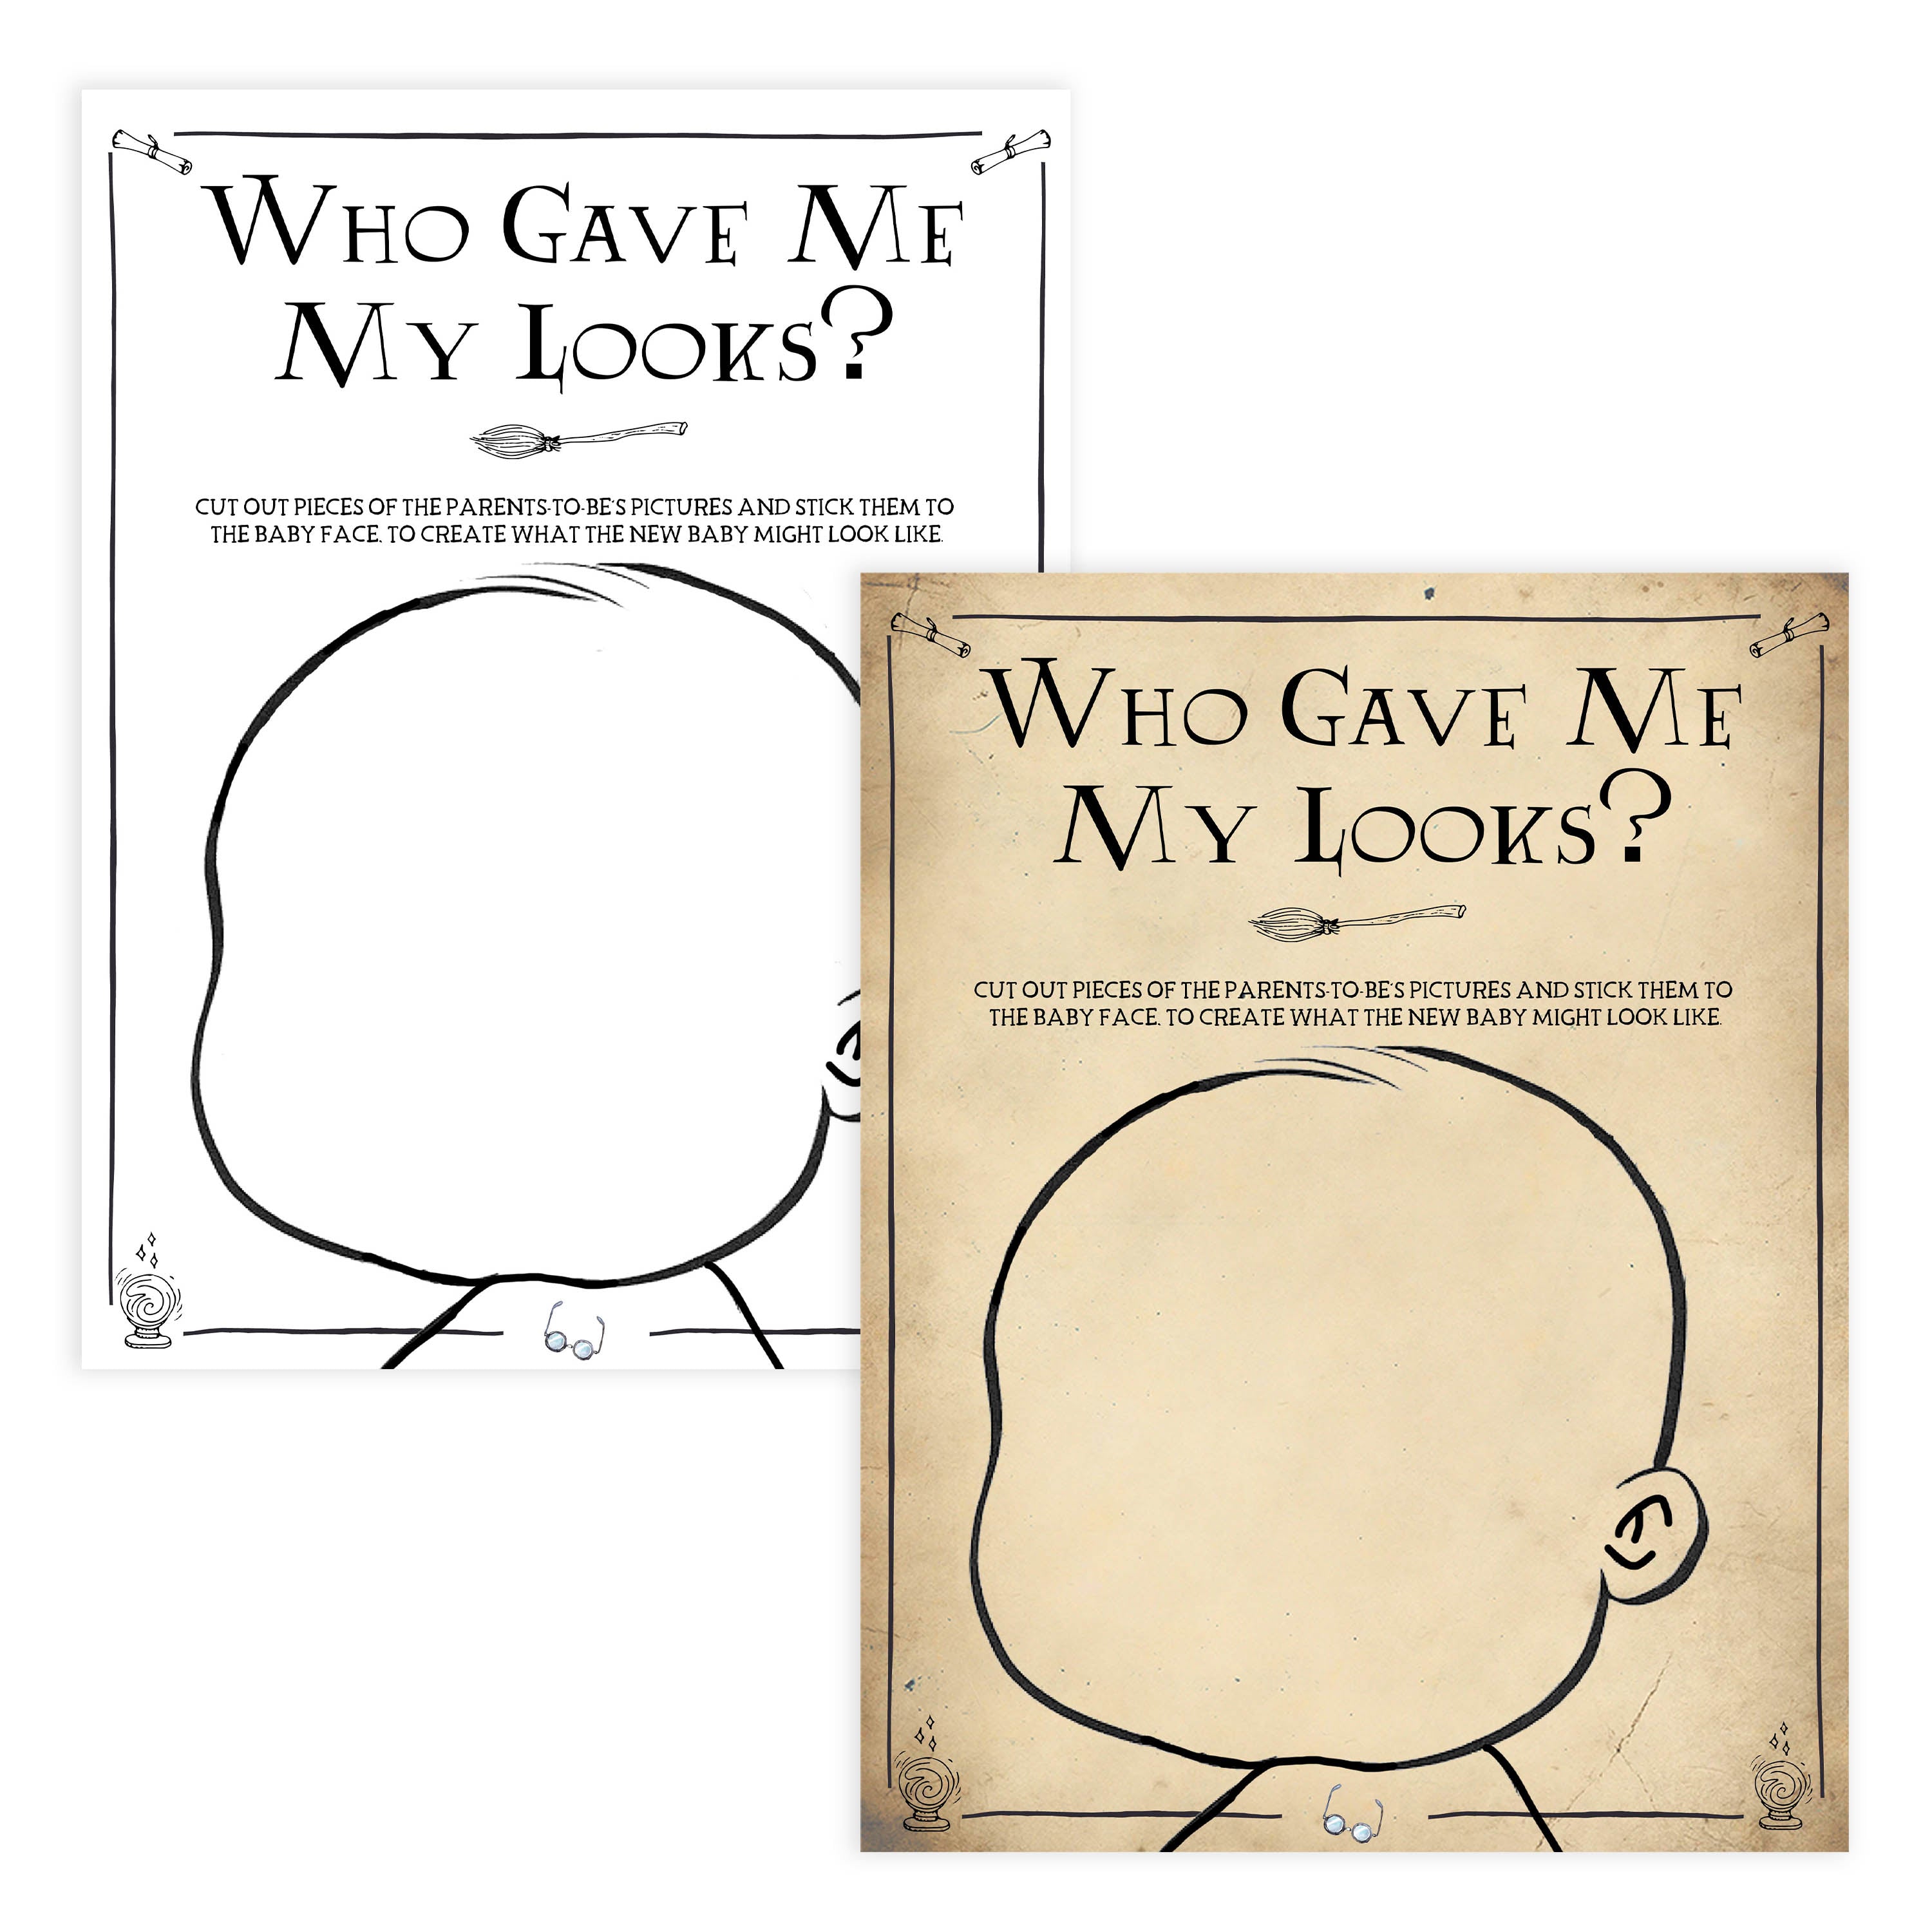 Who Gave Me My Looks, Baby Looks Game, Wizard baby shower games, printable baby shower games, Harry Potter baby games, Harry Potter baby shower, fun baby shower games,  fun baby ideas